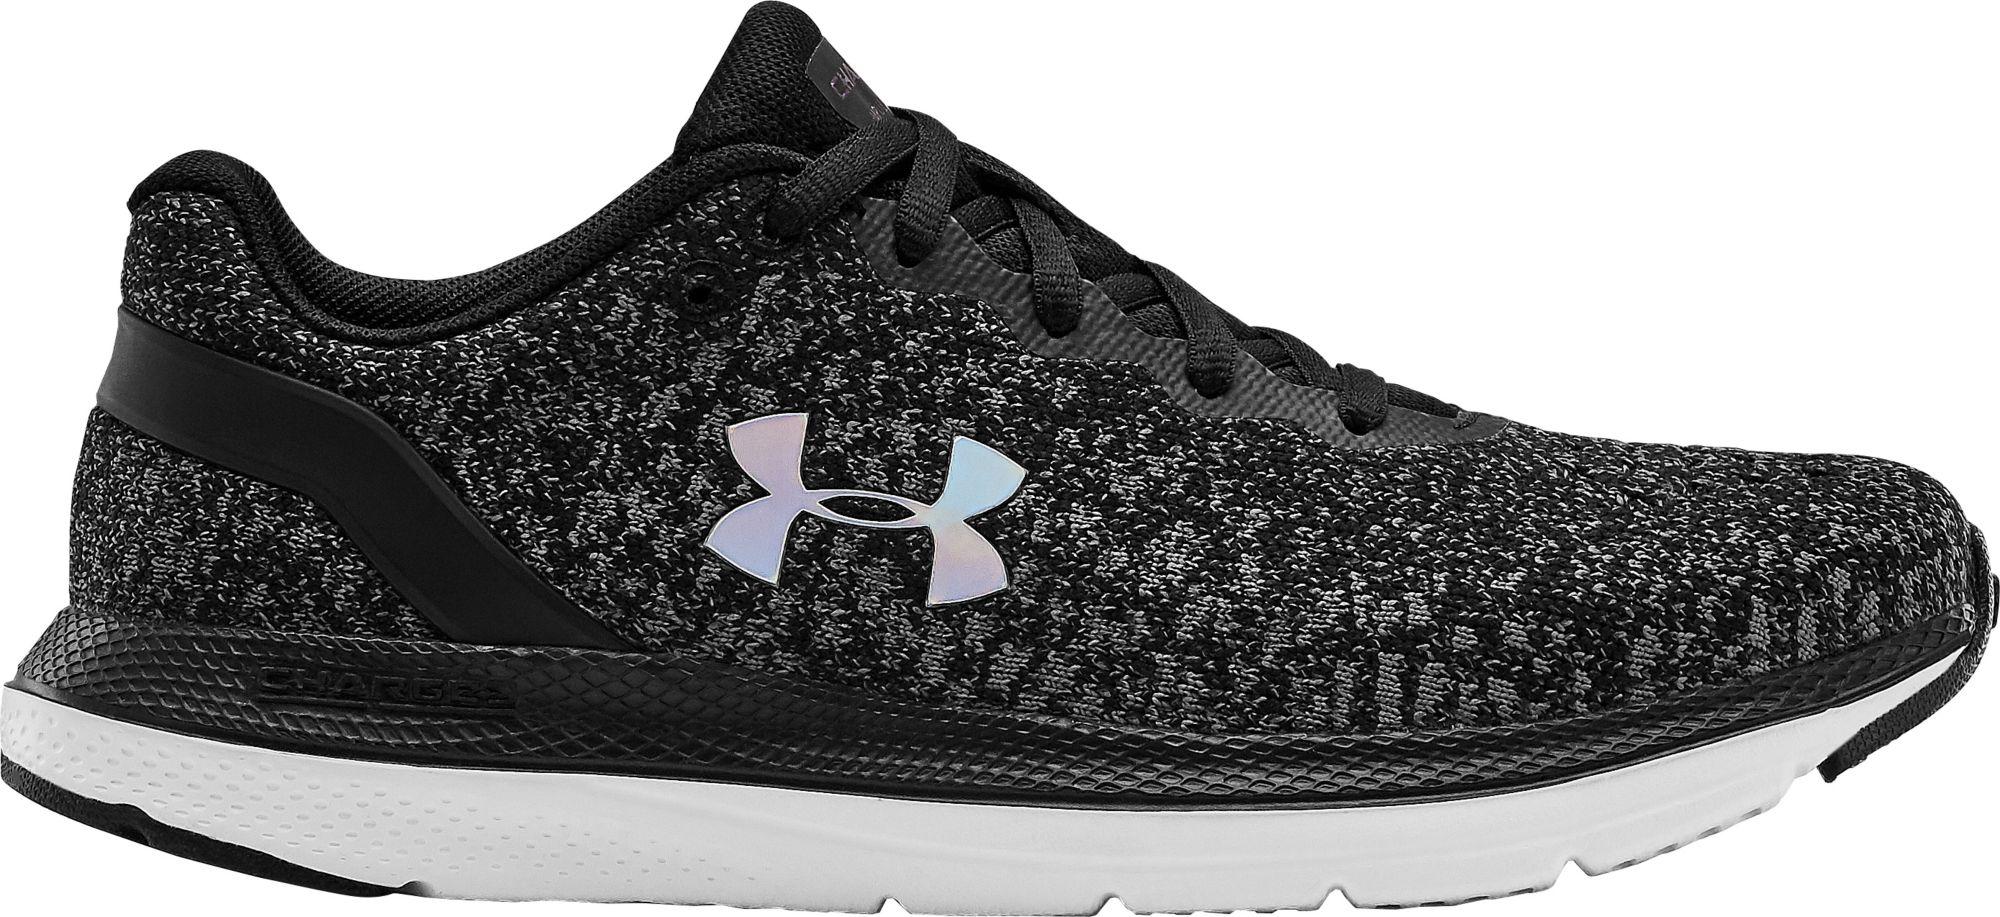 Under Armour Rubber Charge Impulse Knit Running Shoes in Black - Lyst